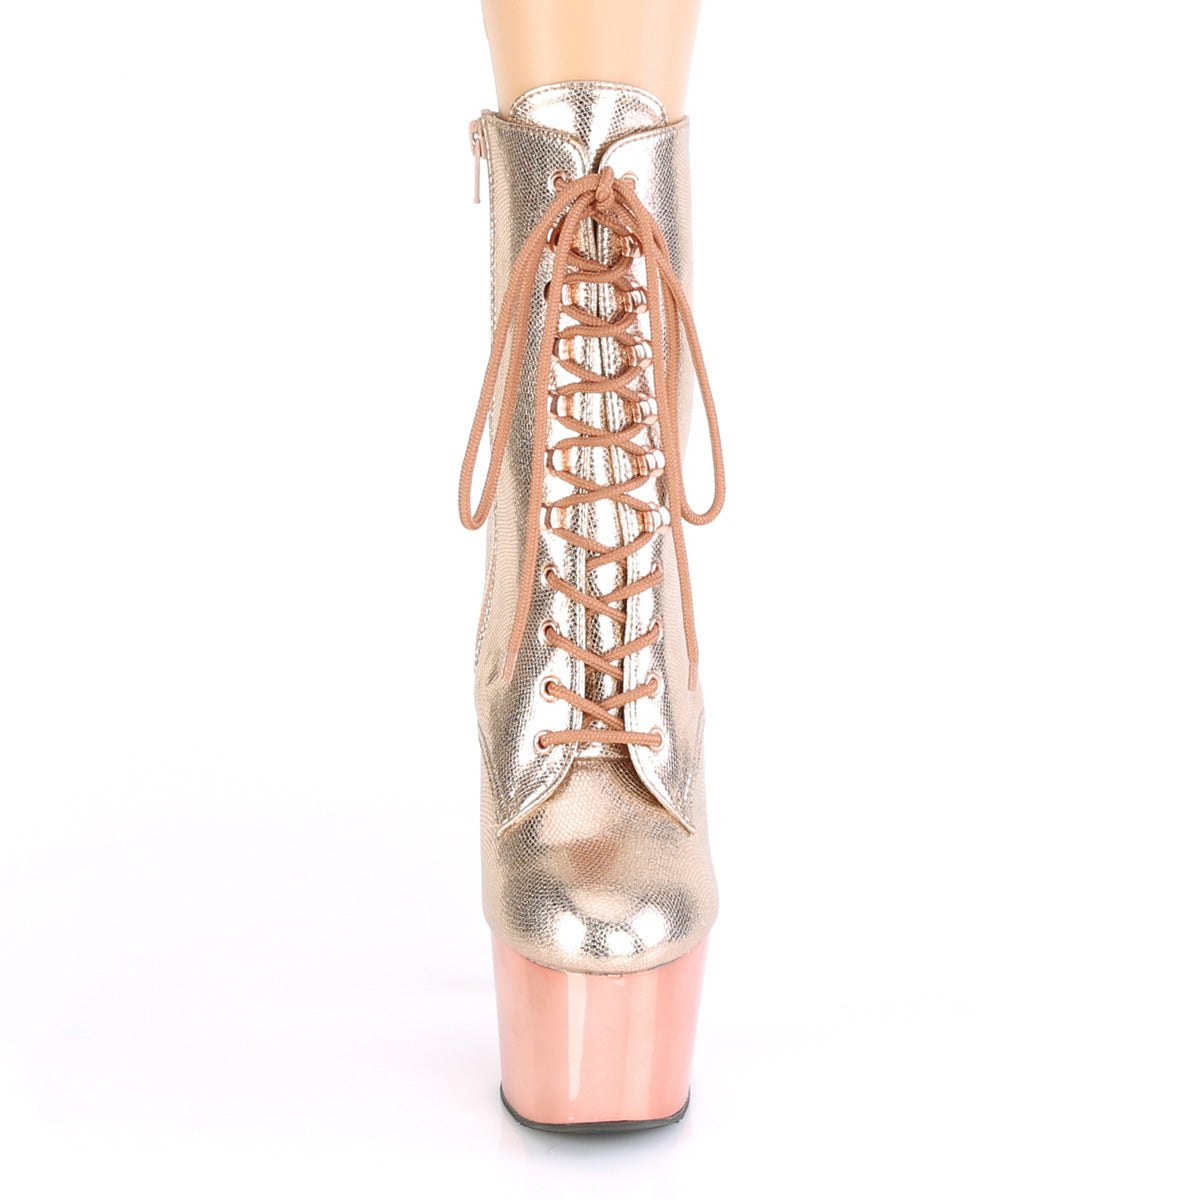 ADORE 1020 7" Heel Rose Gold Met Exotic Dance Ankle Boots Pleaser Sexy Shoes Alternative Footwear